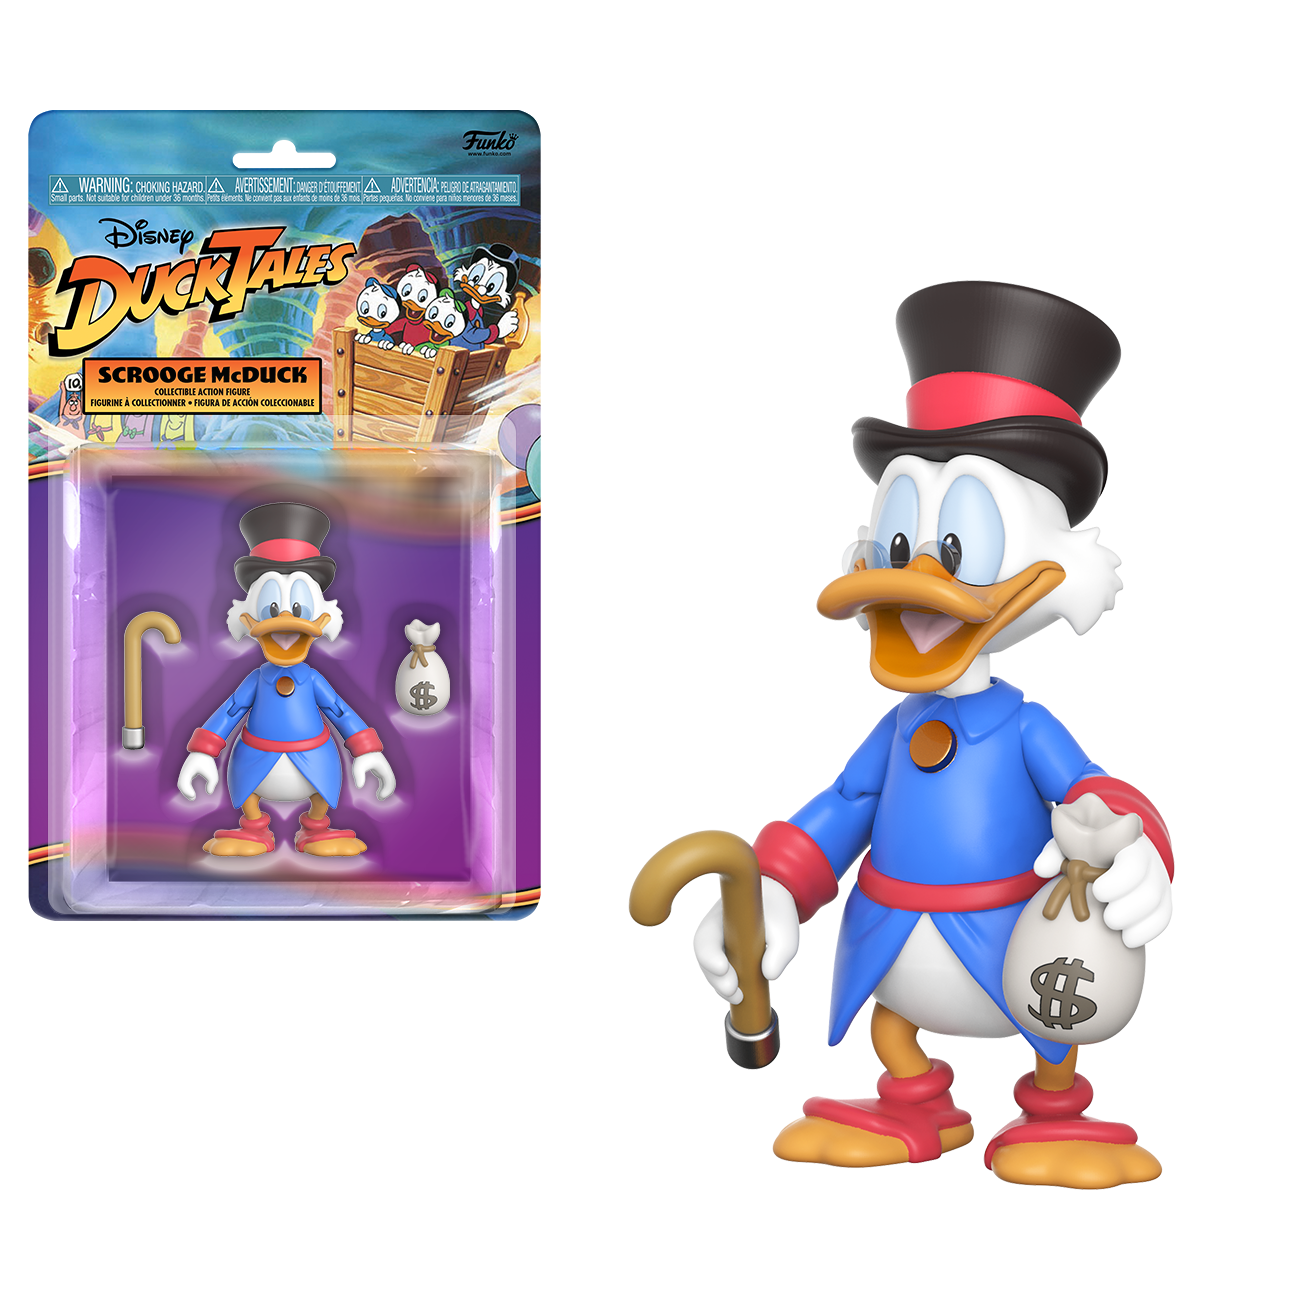 https://cdn.shopify.com/s/files/1/0552/1401/products/1436_3266_20398_ScroogeMcDuck_AF_GLAM.png?v=1507737983